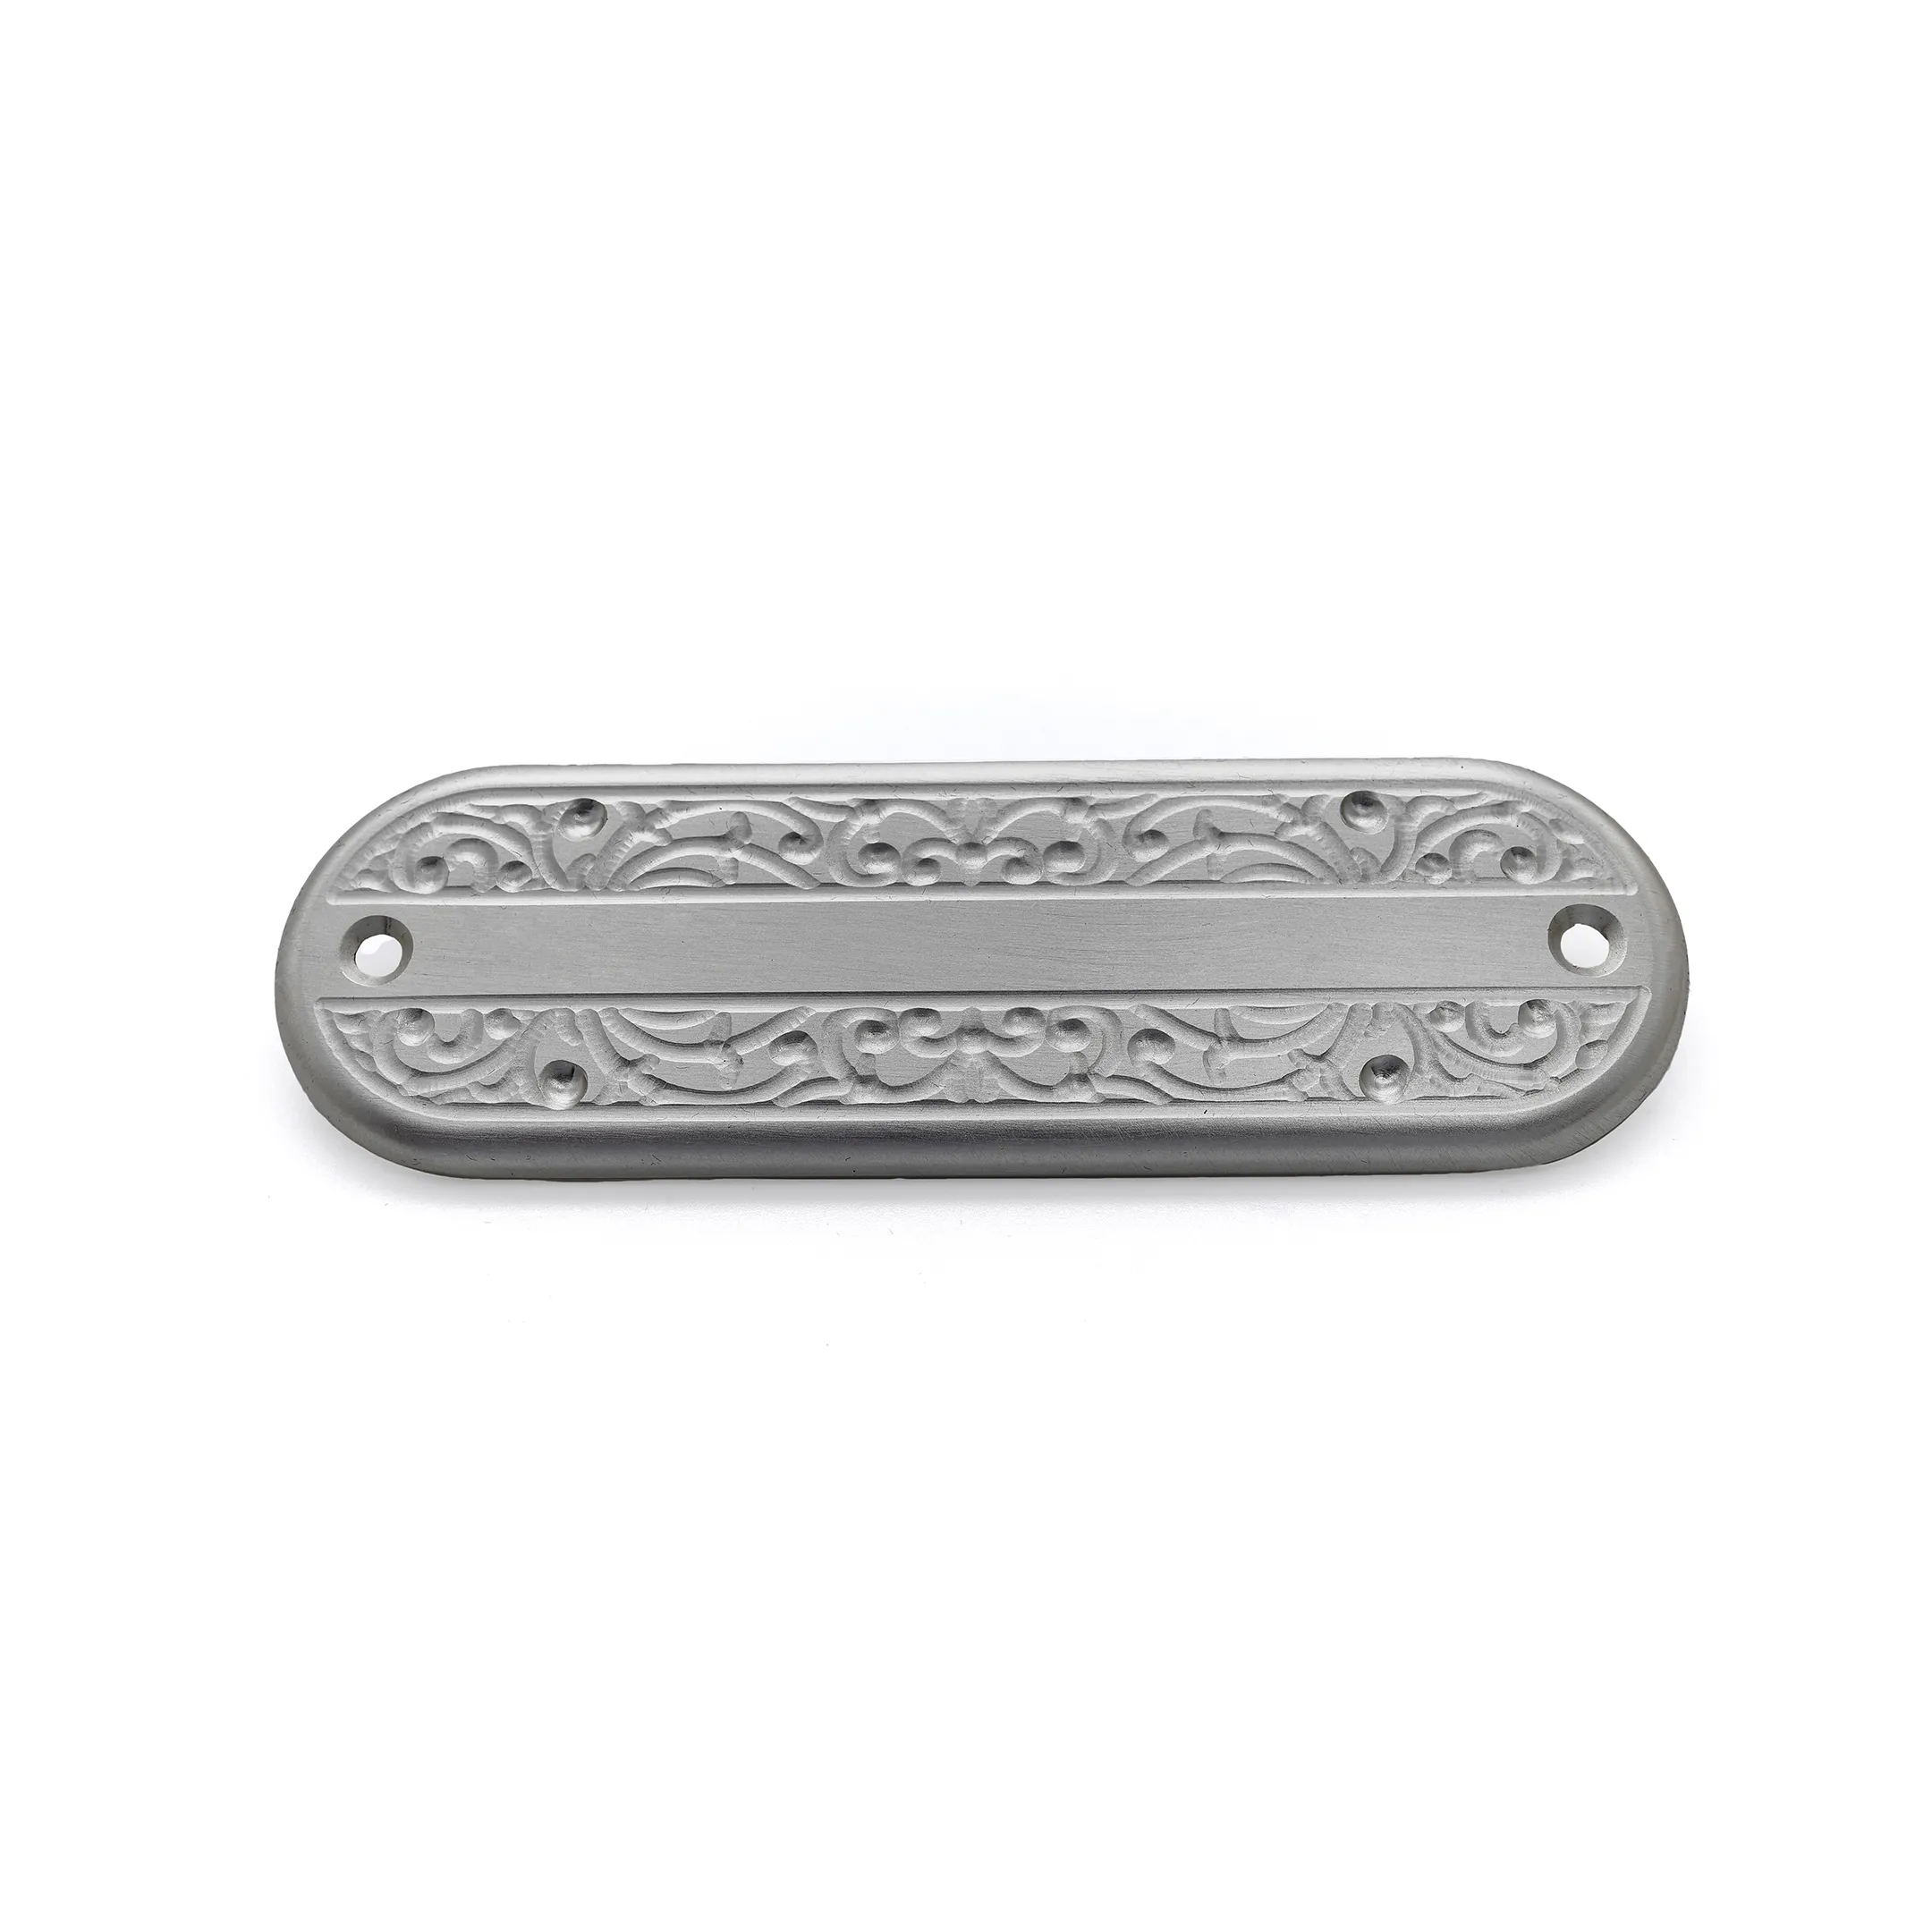 Premium Handcrafted Made in Italy Asmara Rounded Corners Silver Brass Door Name Plate Plaque Sign Metal Manufacturer